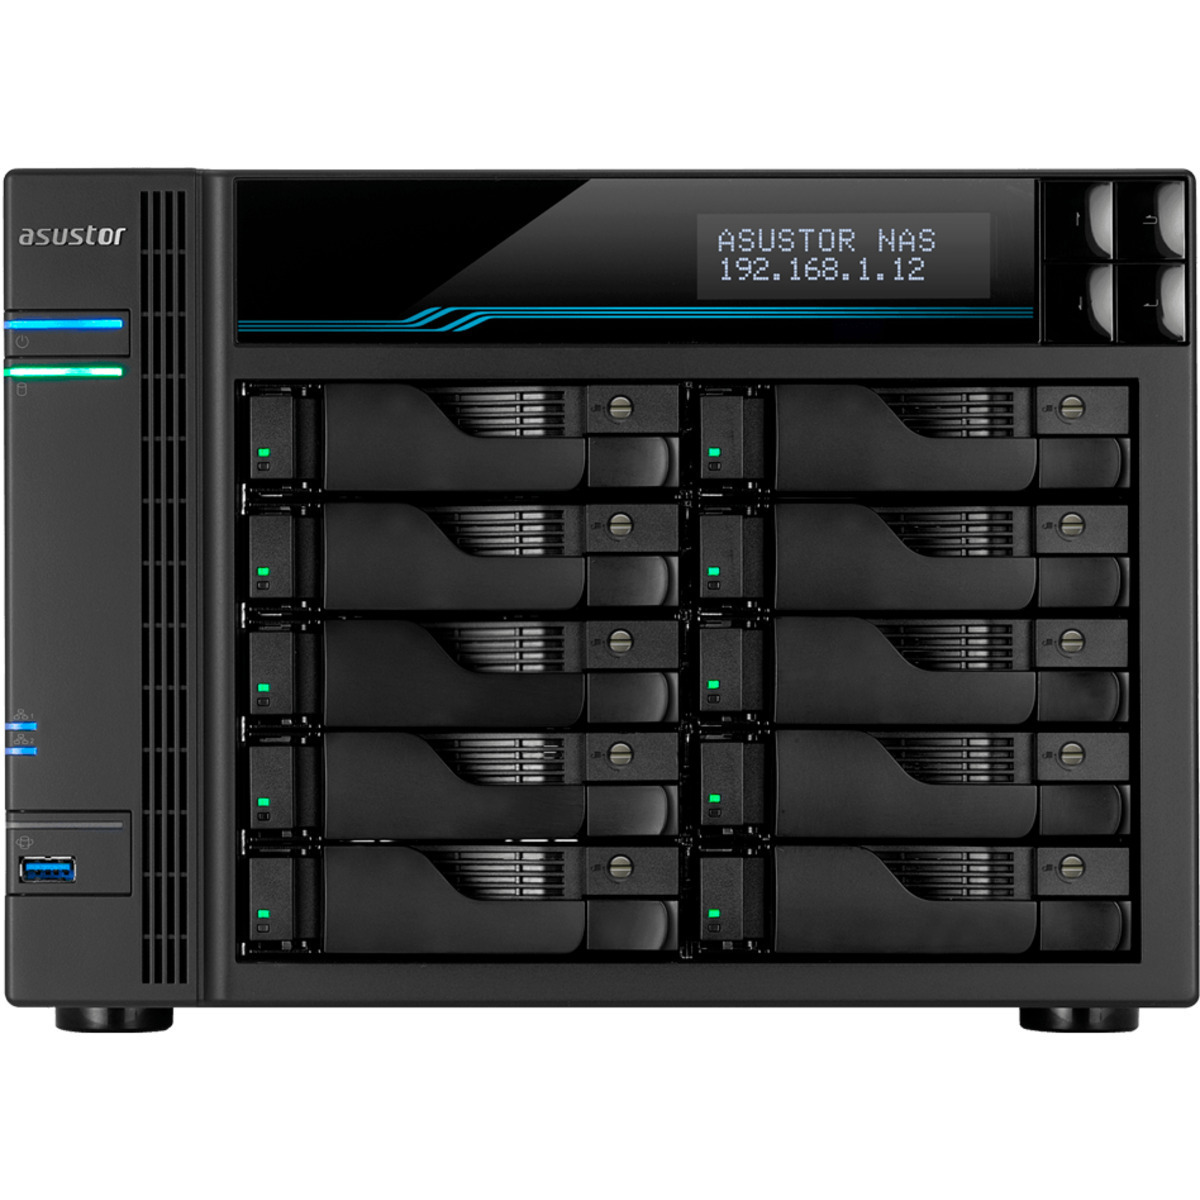 ASUSTOR AS6510T Lockerstor 10 100tb 10-Bay Desktop Multimedia / Power User / Business NAS - Network Attached Storage Device 10x10tb Seagate IronWolf Pro ST10000NT001 3.5 7200rpm SATA 6Gb/s HDD NAS Class Drives Installed - Burn-In Tested - ON SALE - FREE RAM UPGRADE AS6510T Lockerstor 10